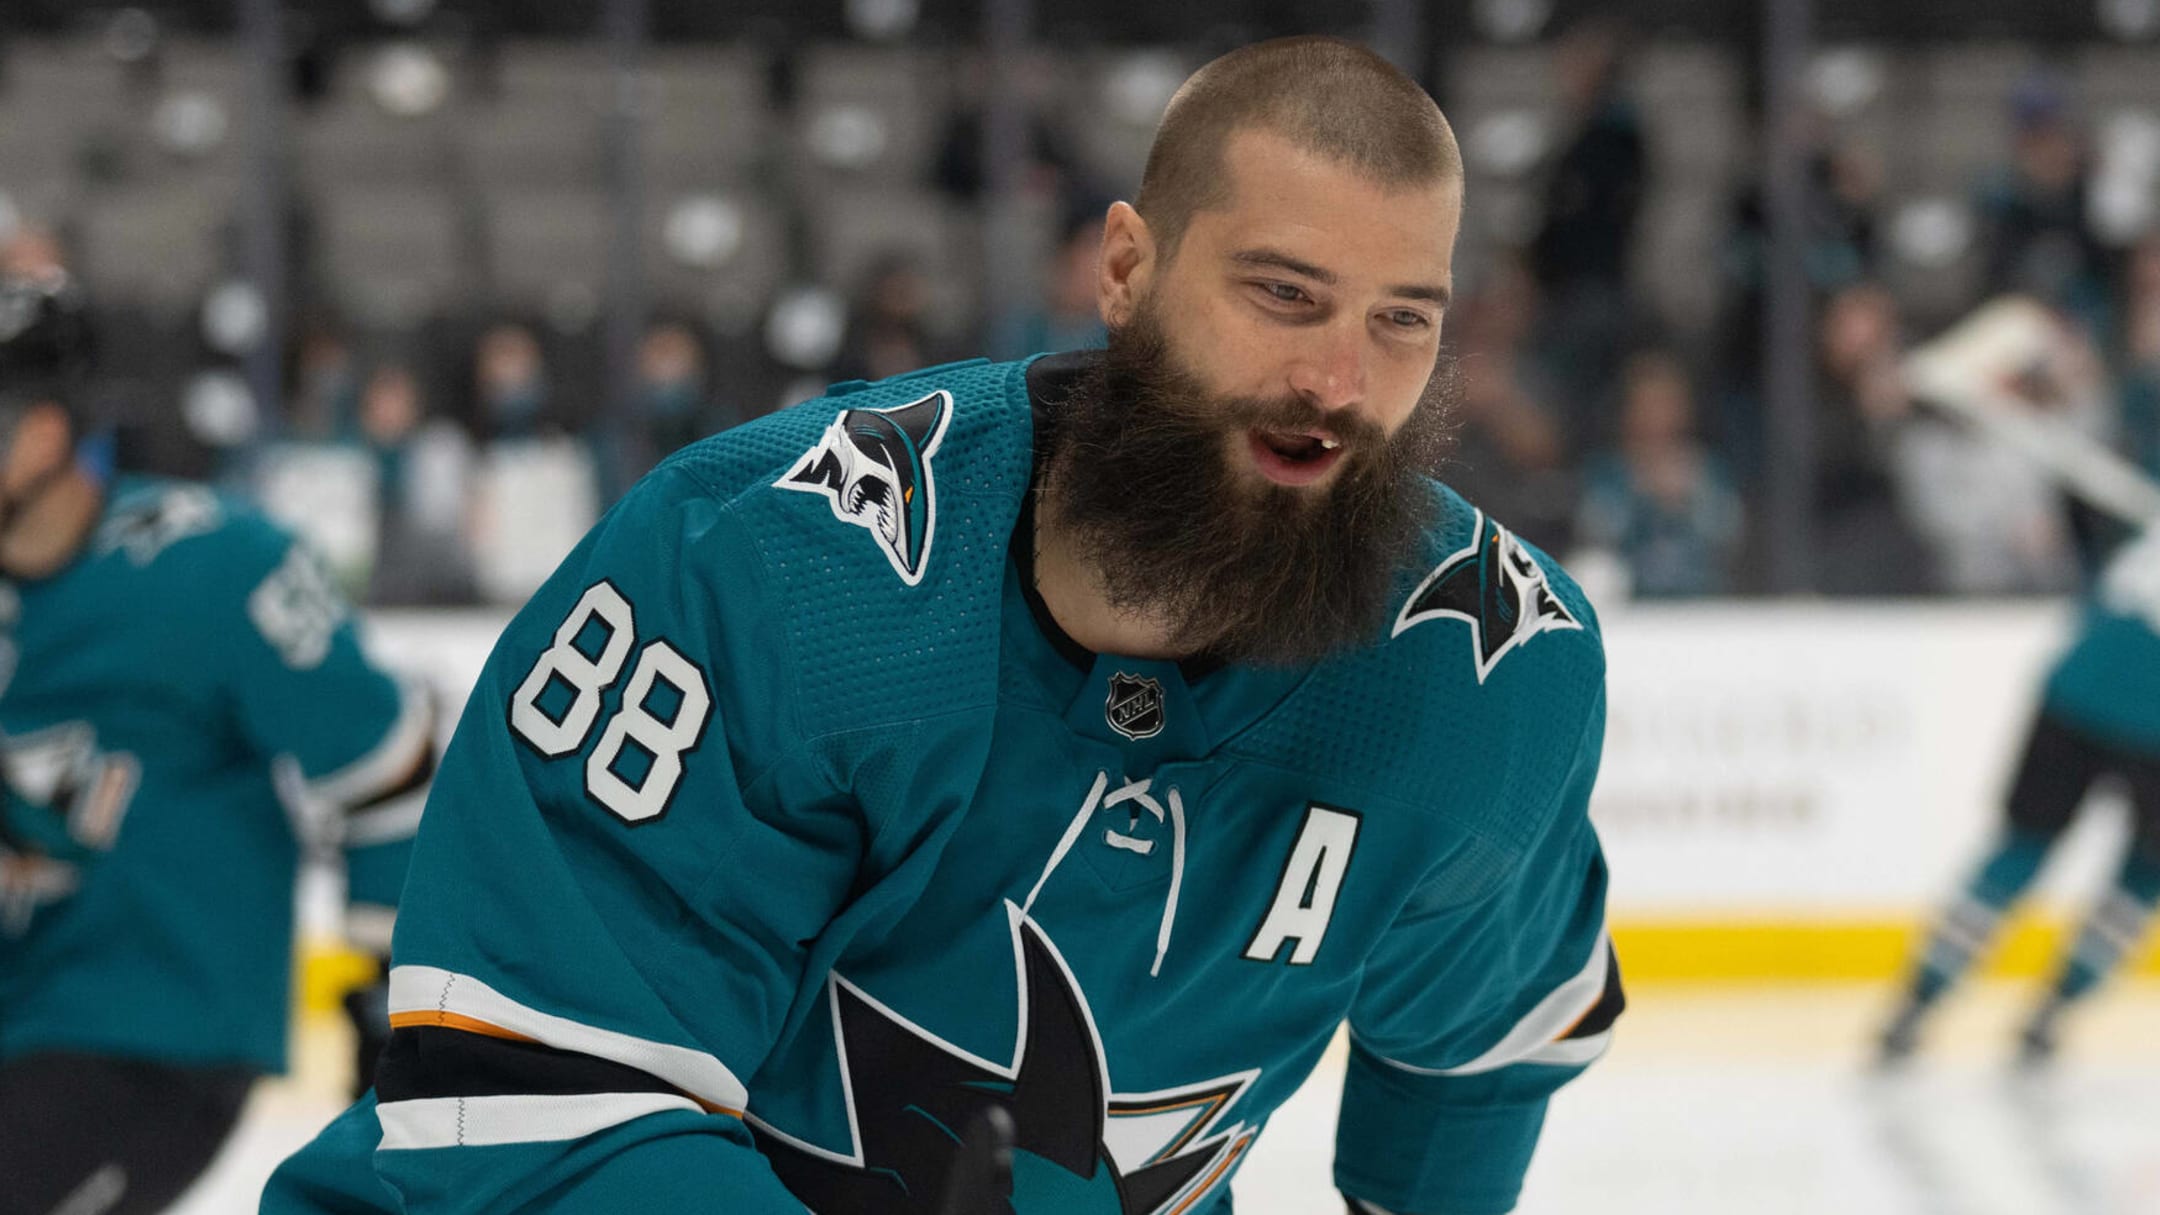 Sharks' Brent Burns would rather talk about travel than hockey, Golden  Knights/NHL